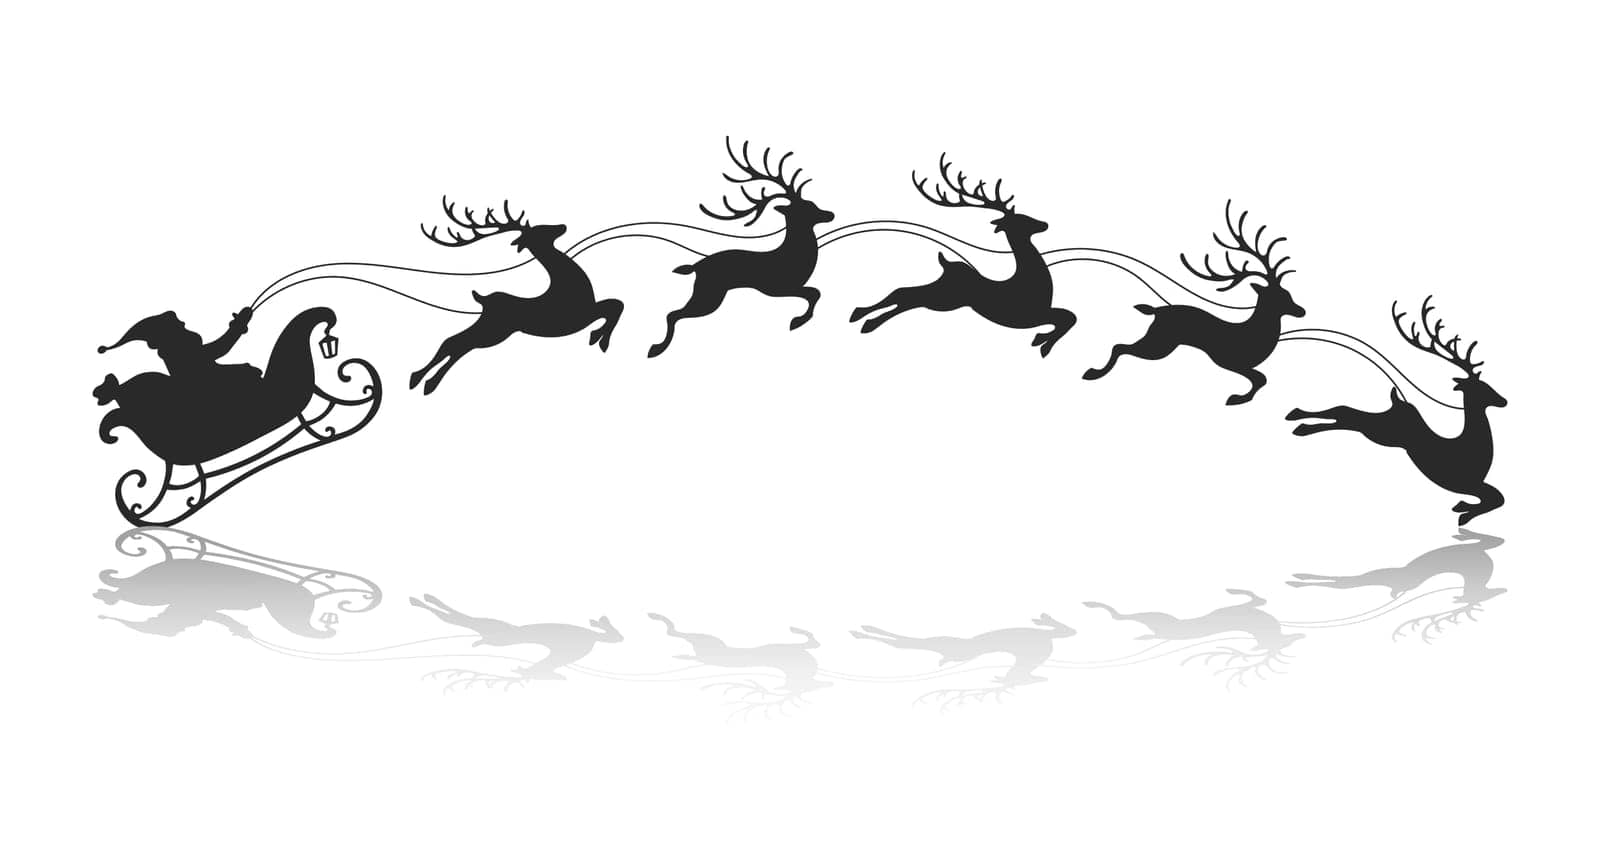 Santa on a sleigh with reindeers, silhouette with reflection on a white background. Winter illustration by VS1959